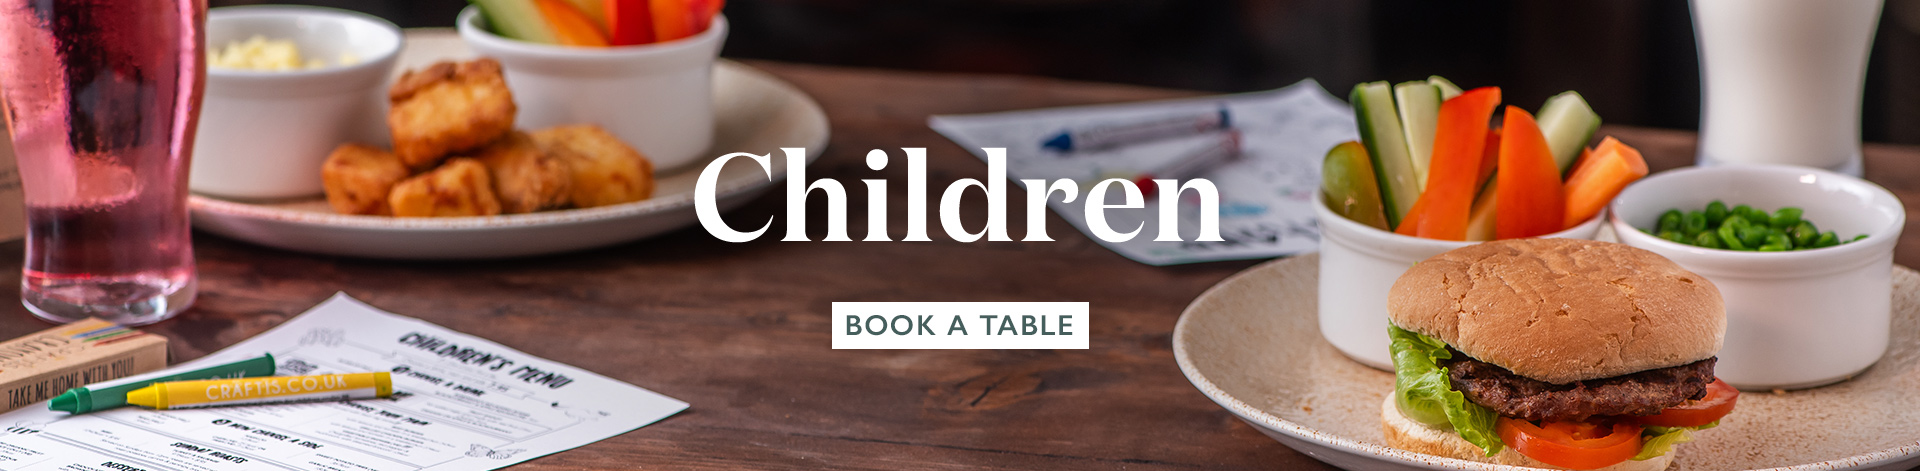 Children's Menu at The Crow and Gate